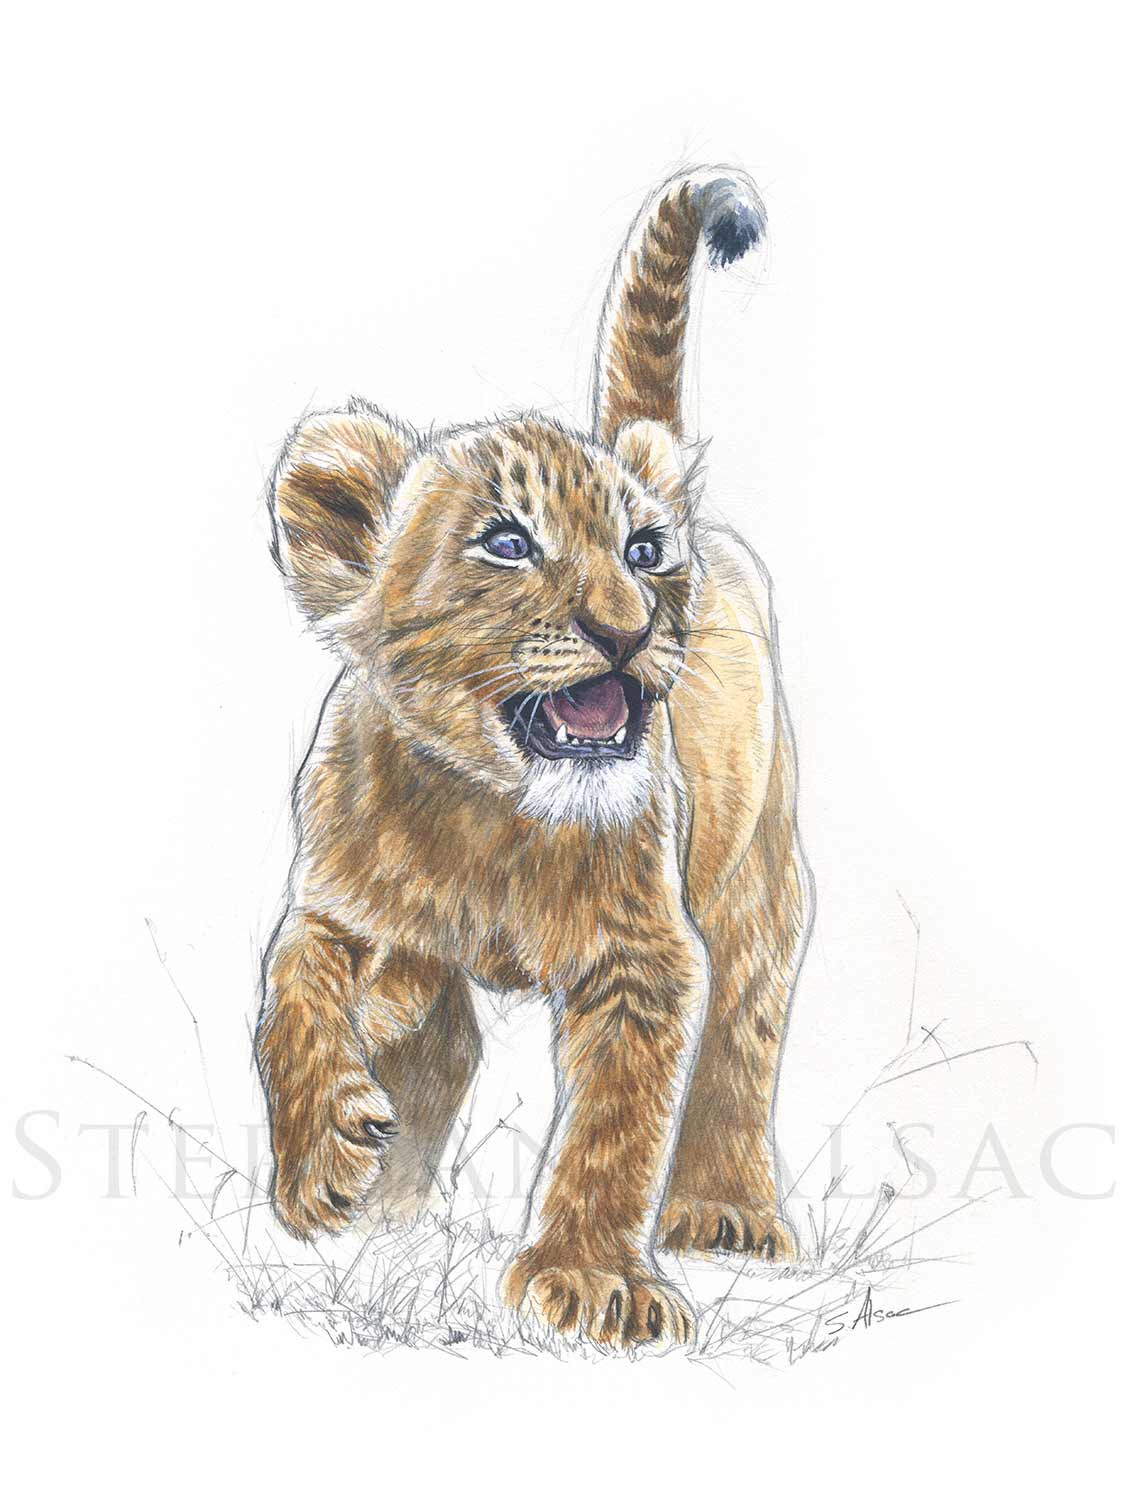 Christopher Straver - LethalChris Drawing - Hi everyone! Here's my drawing  of a Lion Cub! I also uploaded a tutorial video on my YouTube channel - so  be sure to check it